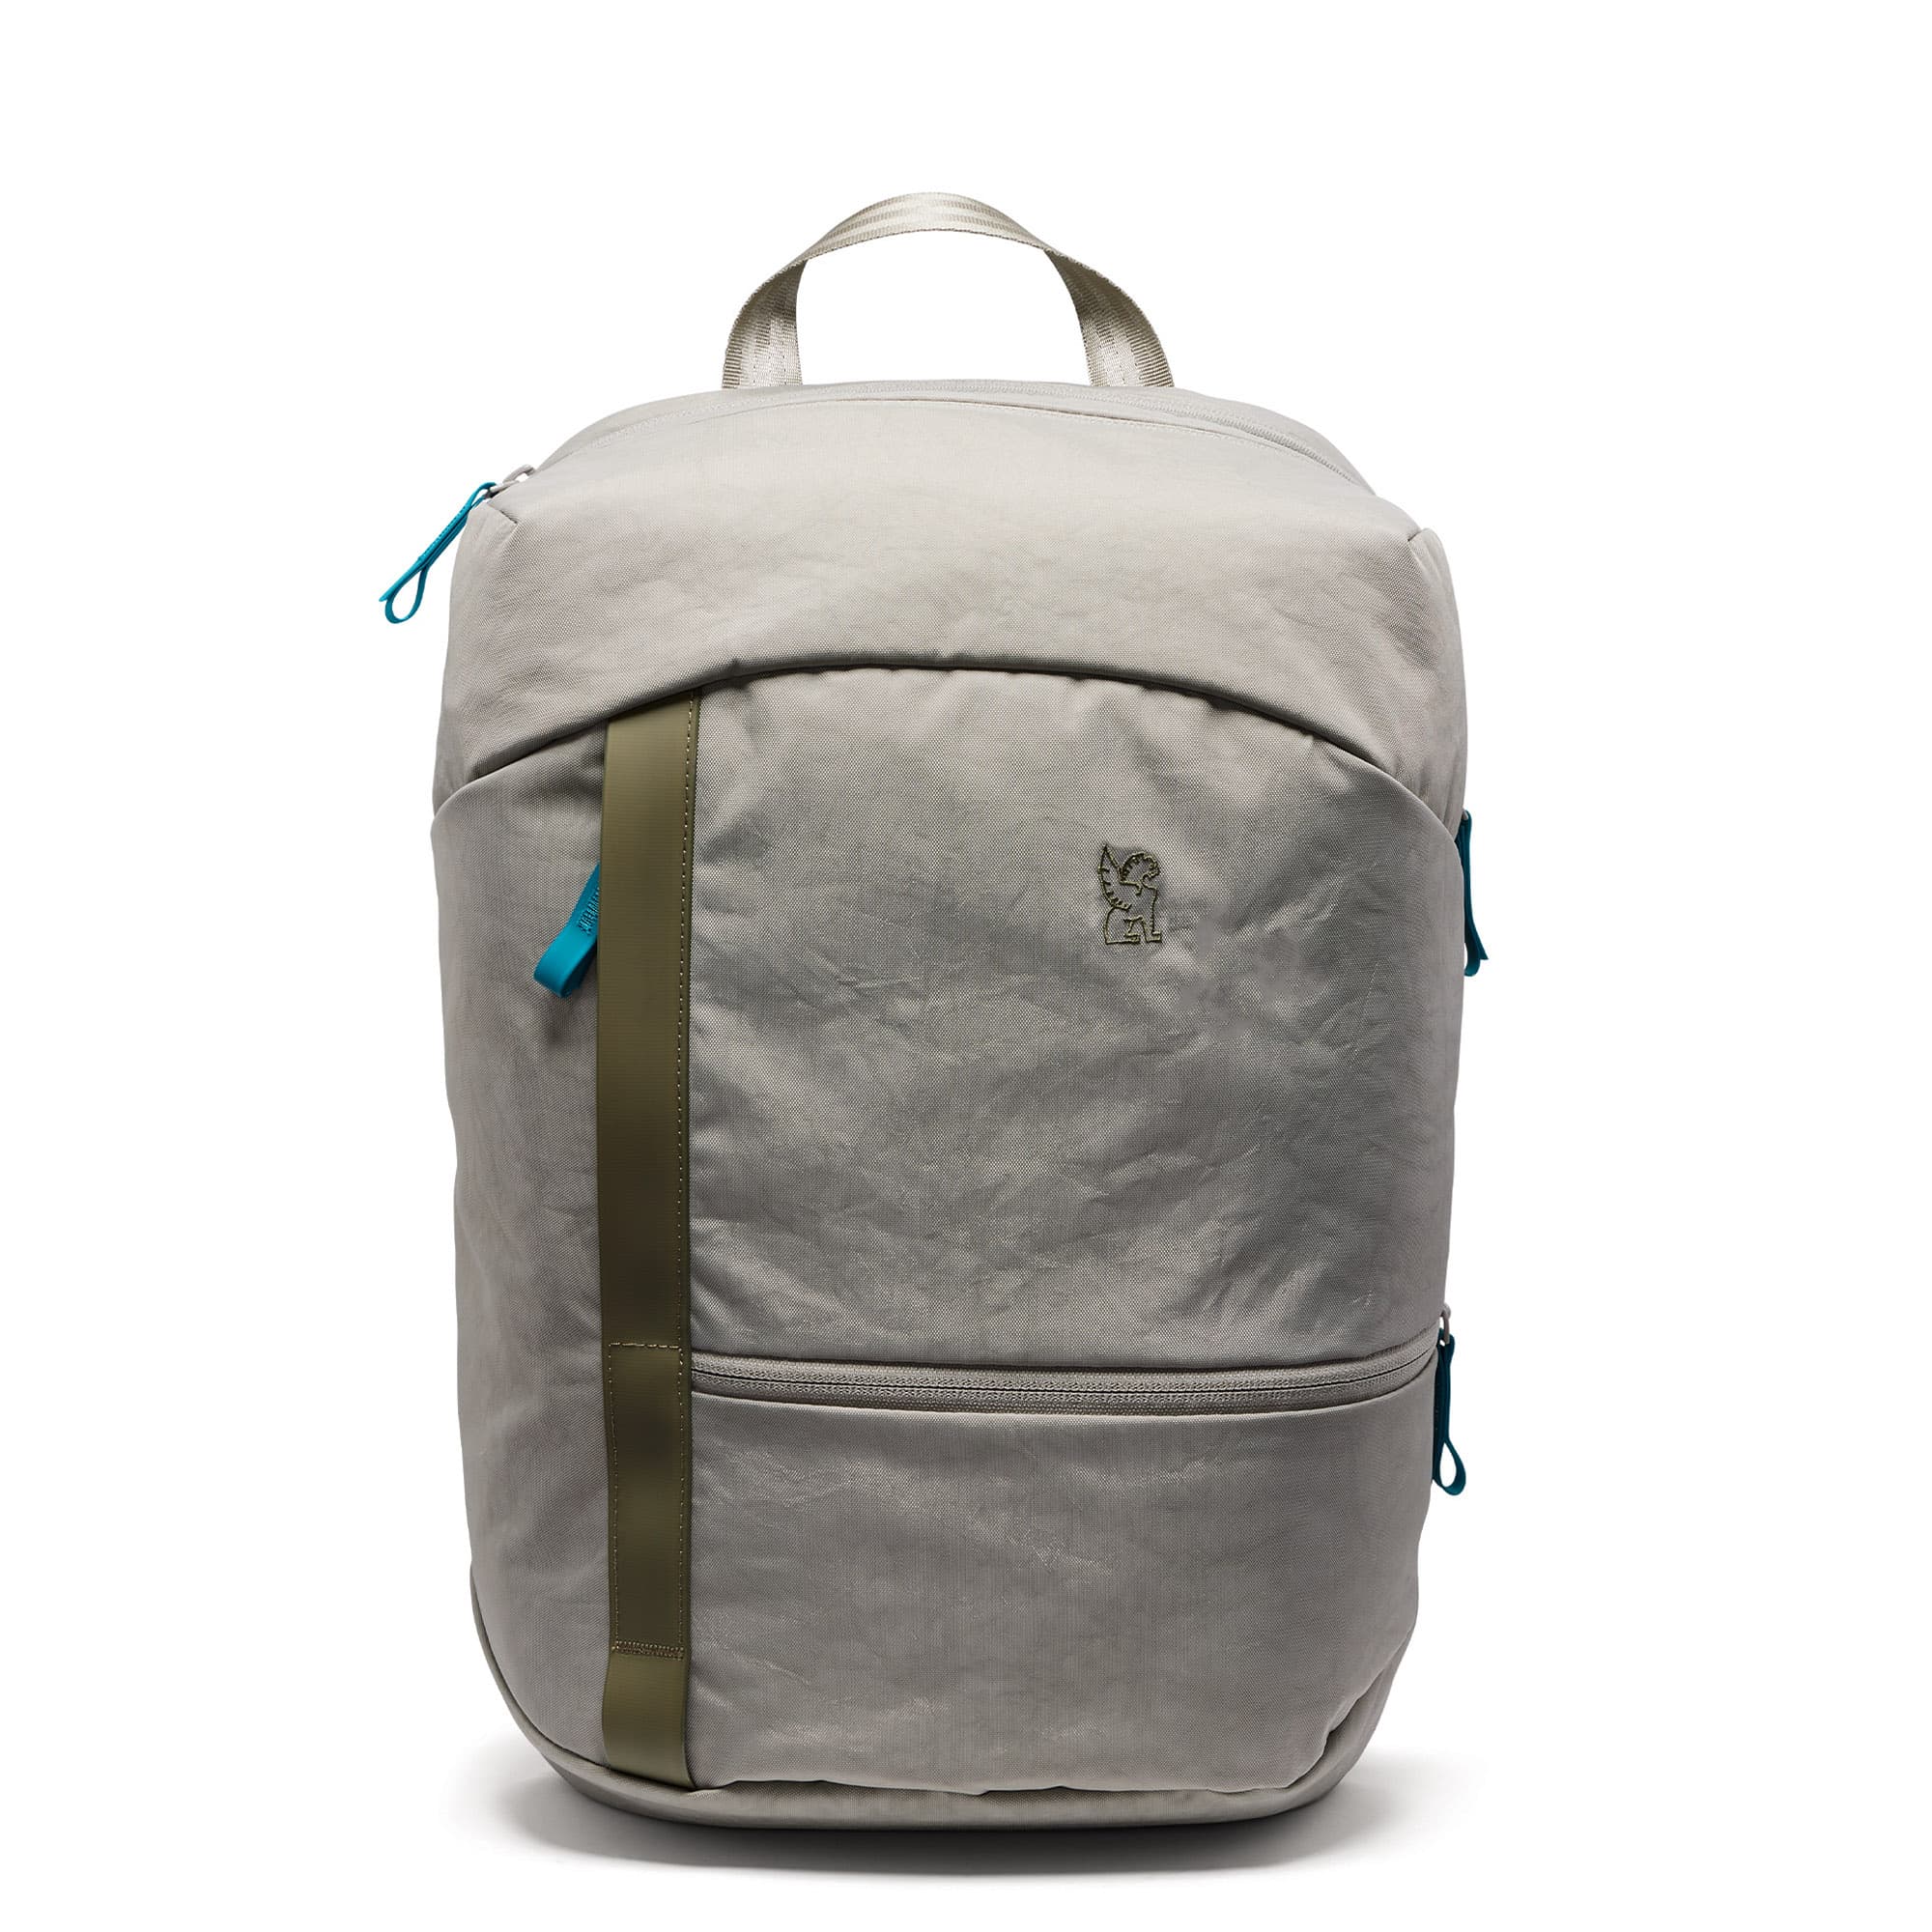 Camden backpack in sage full front view #color_sage